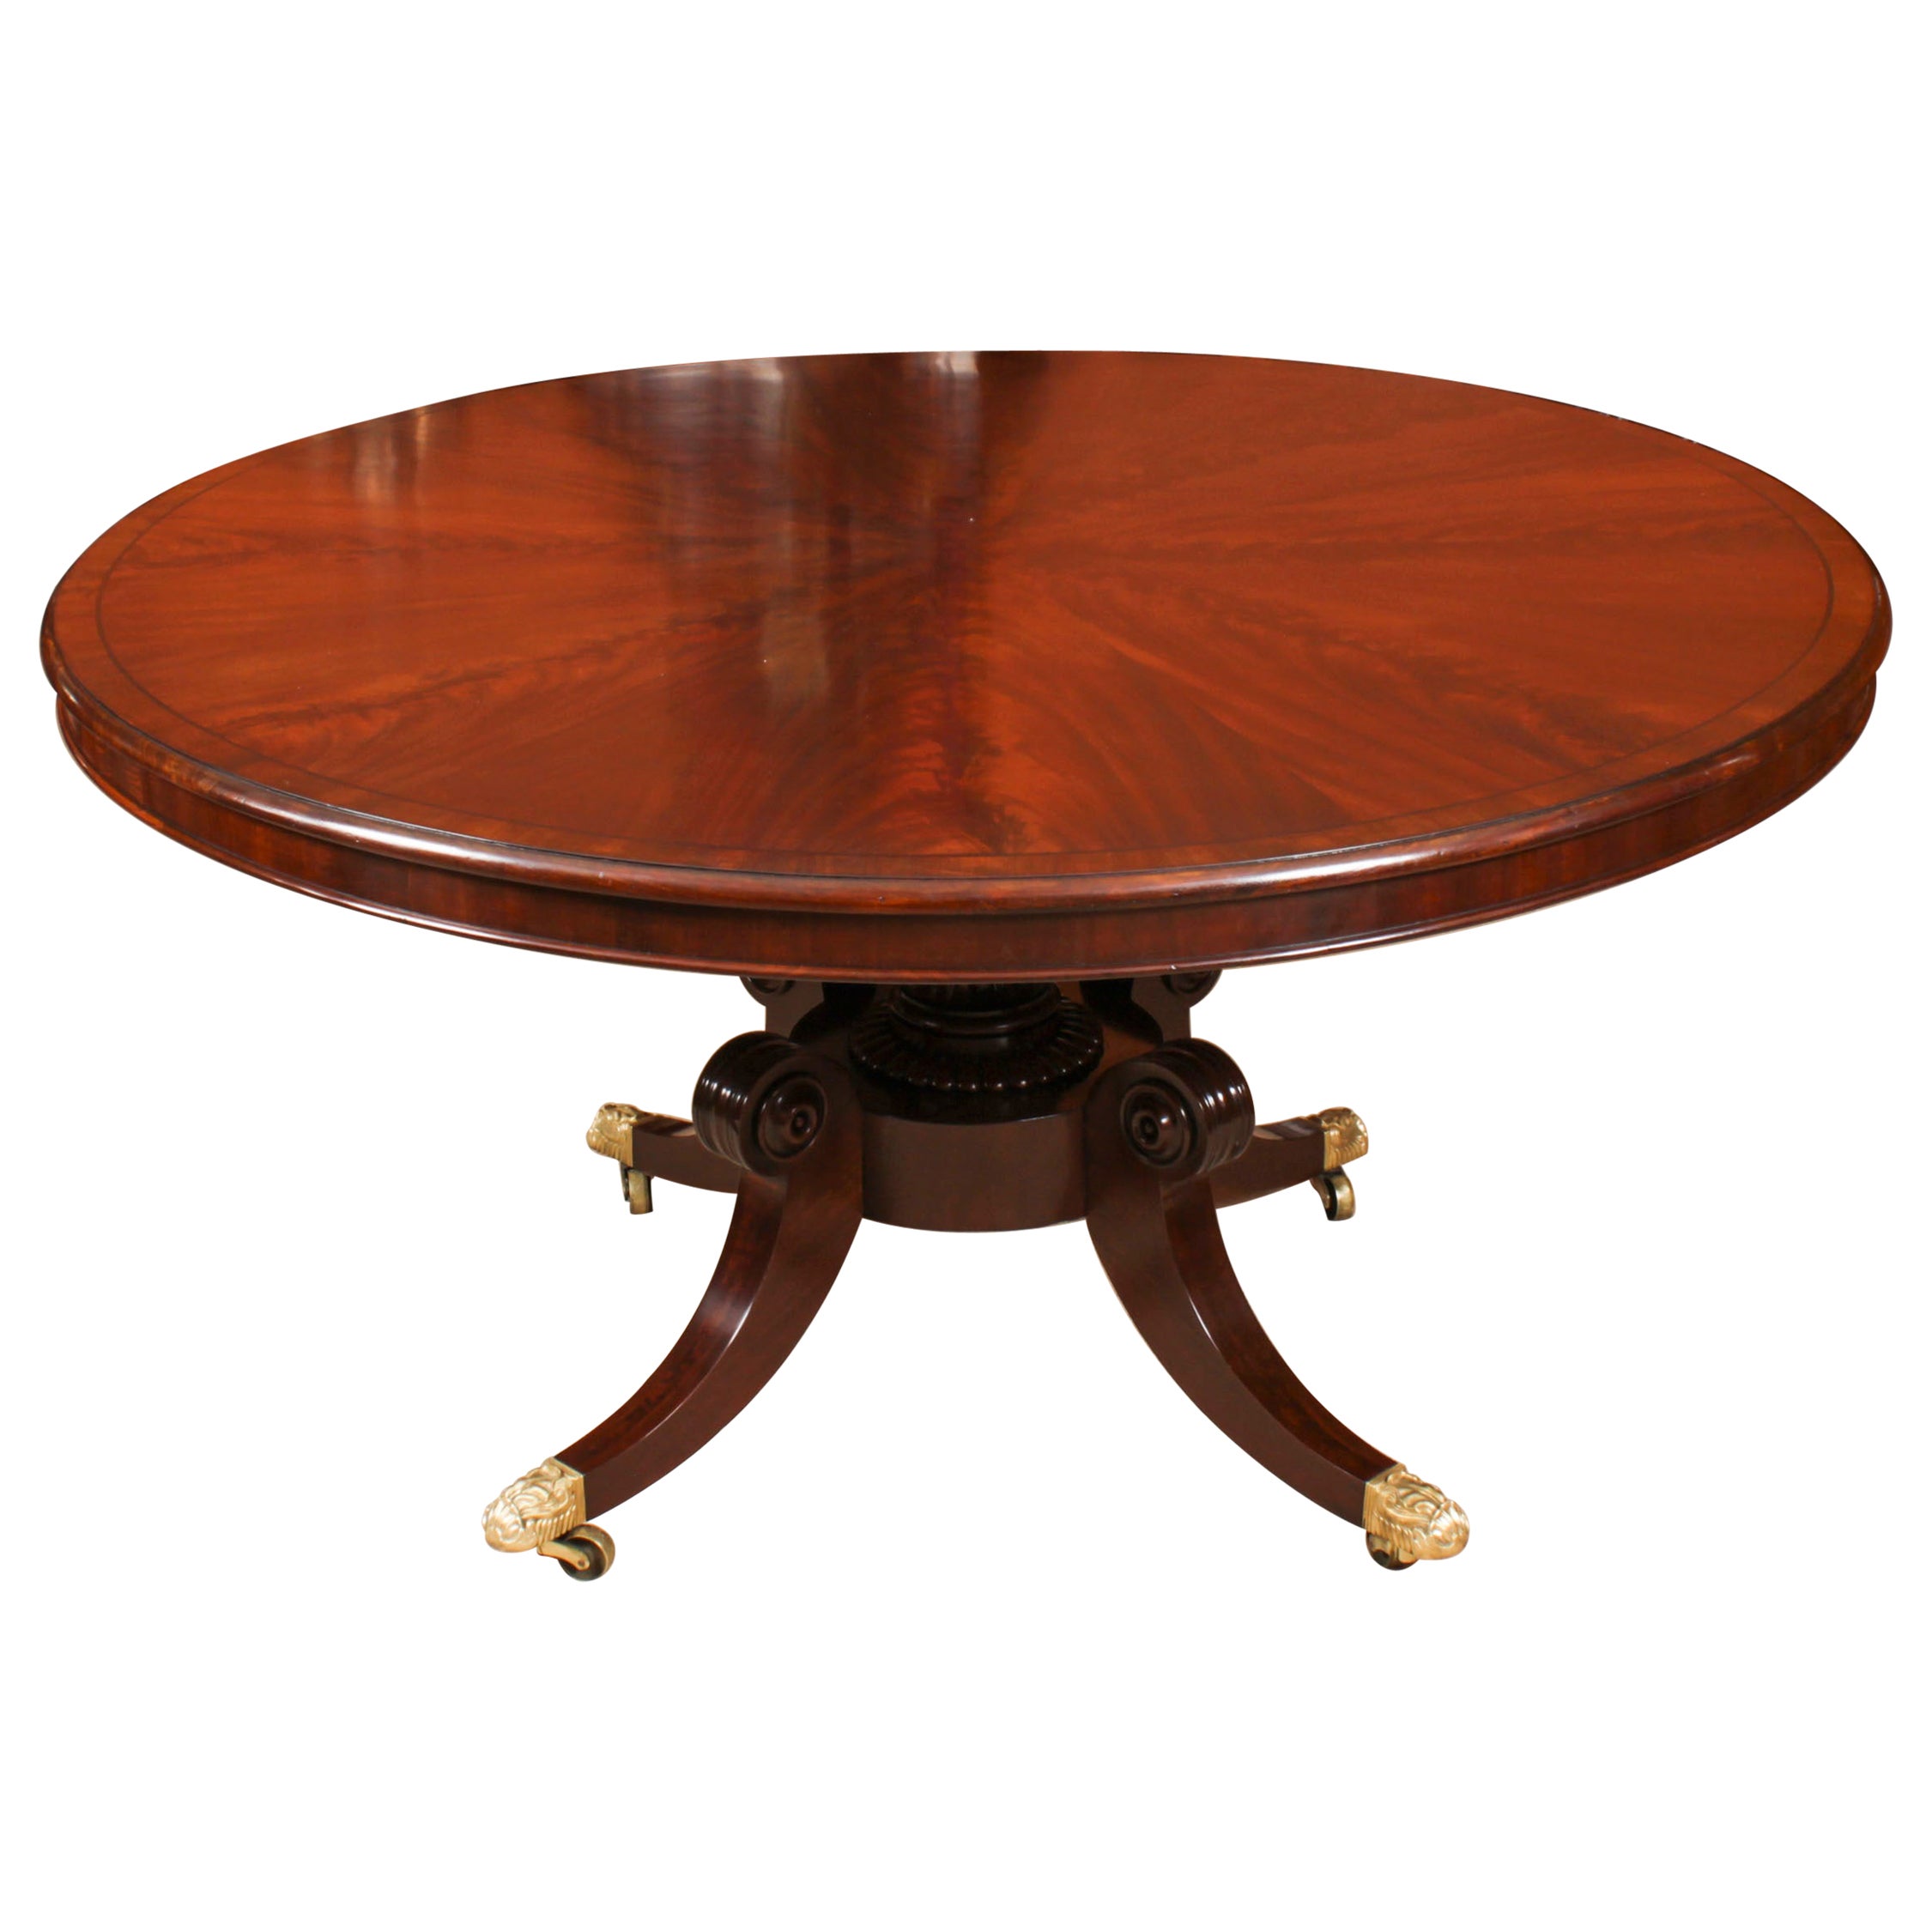 Antique William IV Loo Breakfast Dining Table c.1830 19th C For Sale